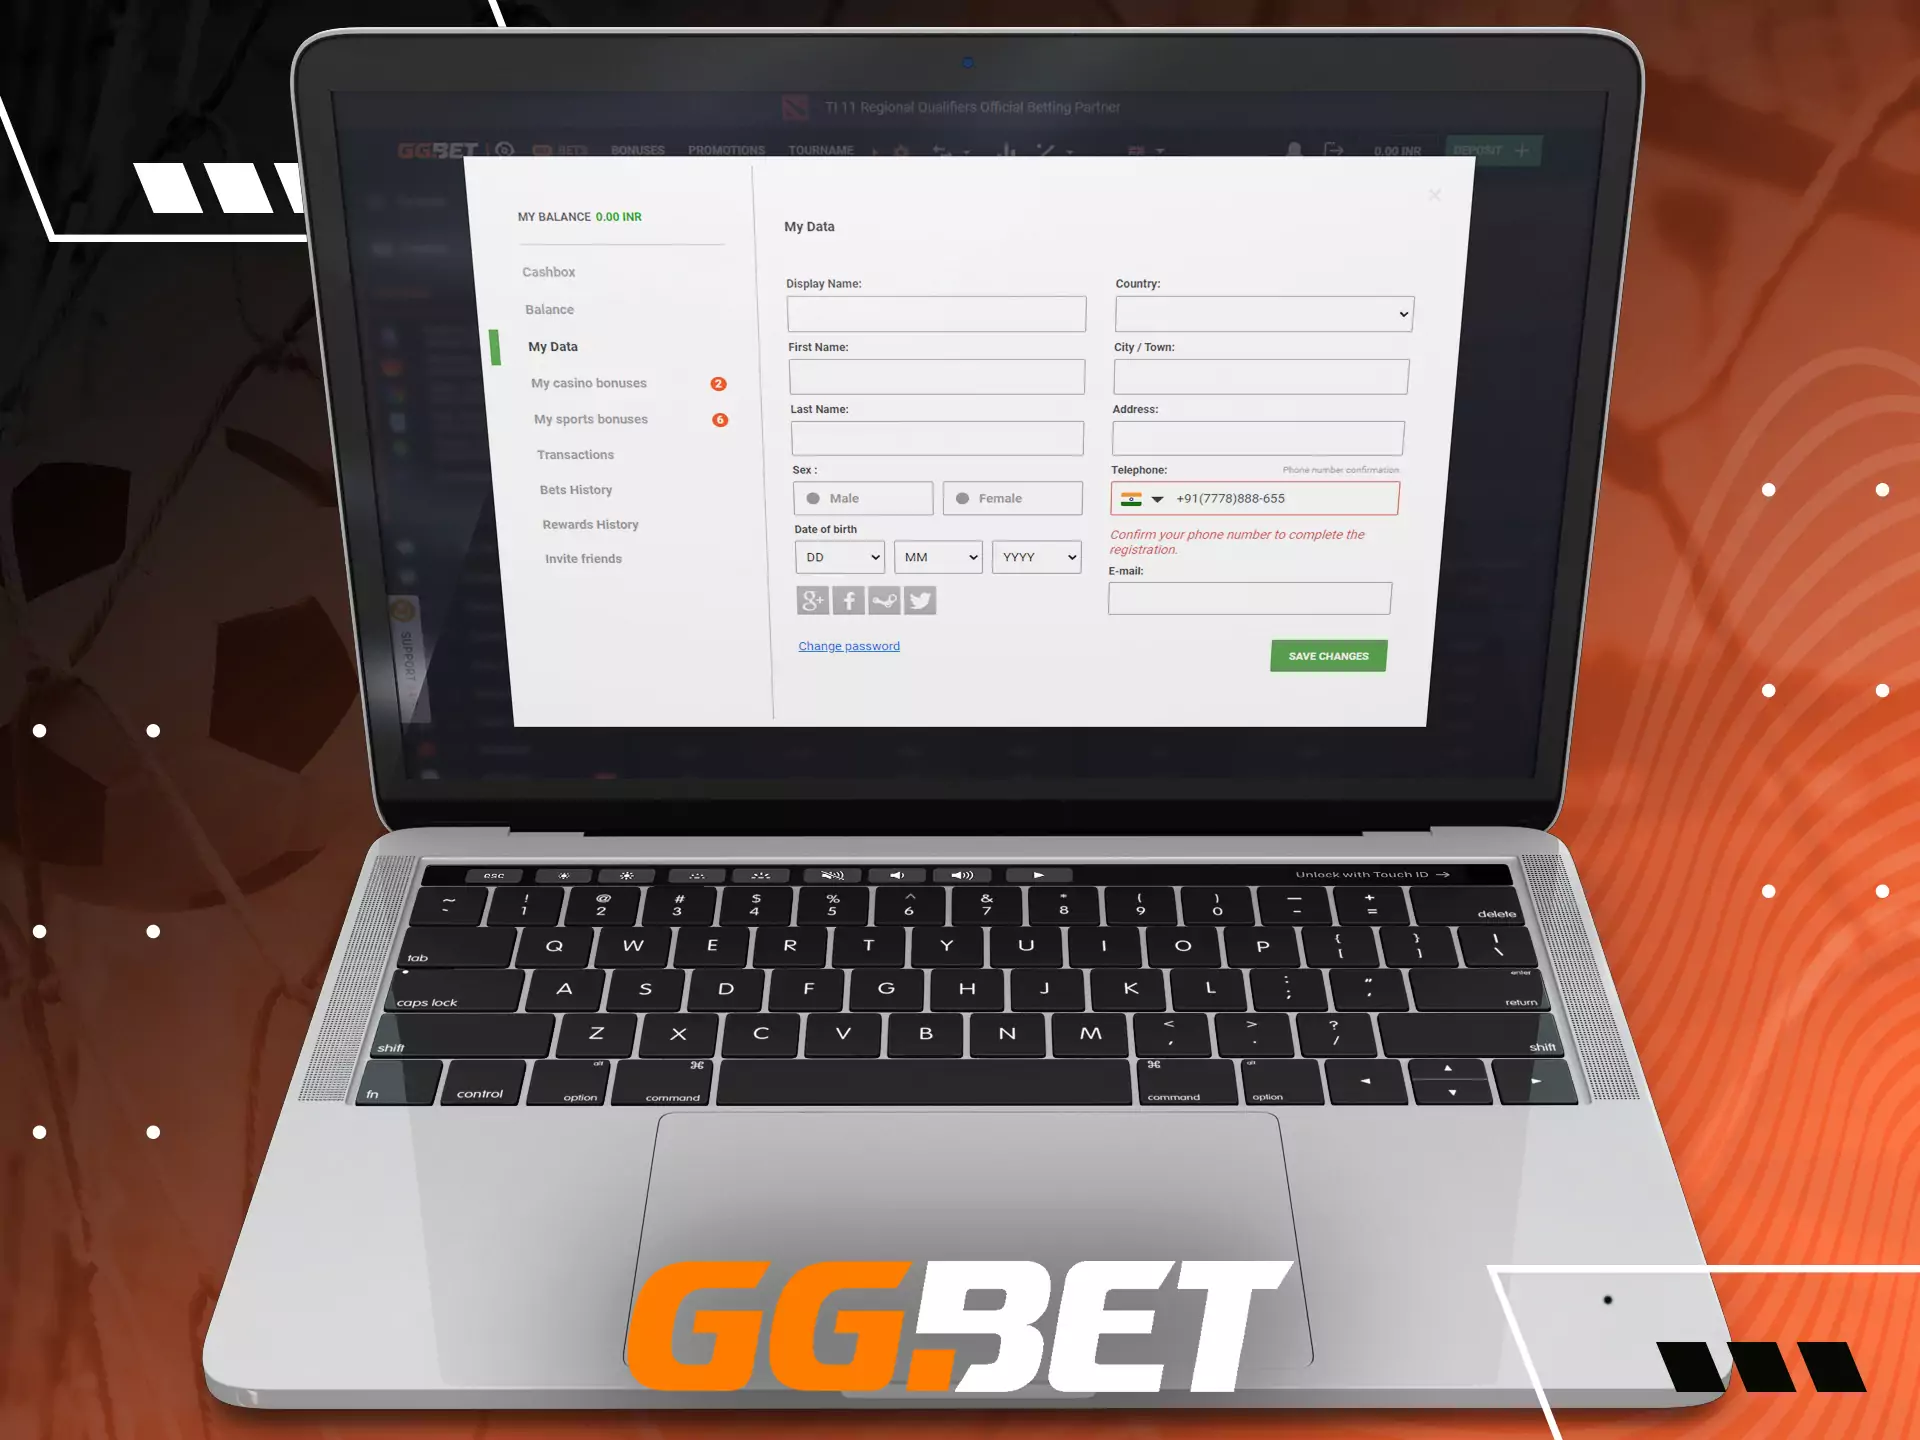 Verify your GGBet betting account to be allowed to use all the features of the site.